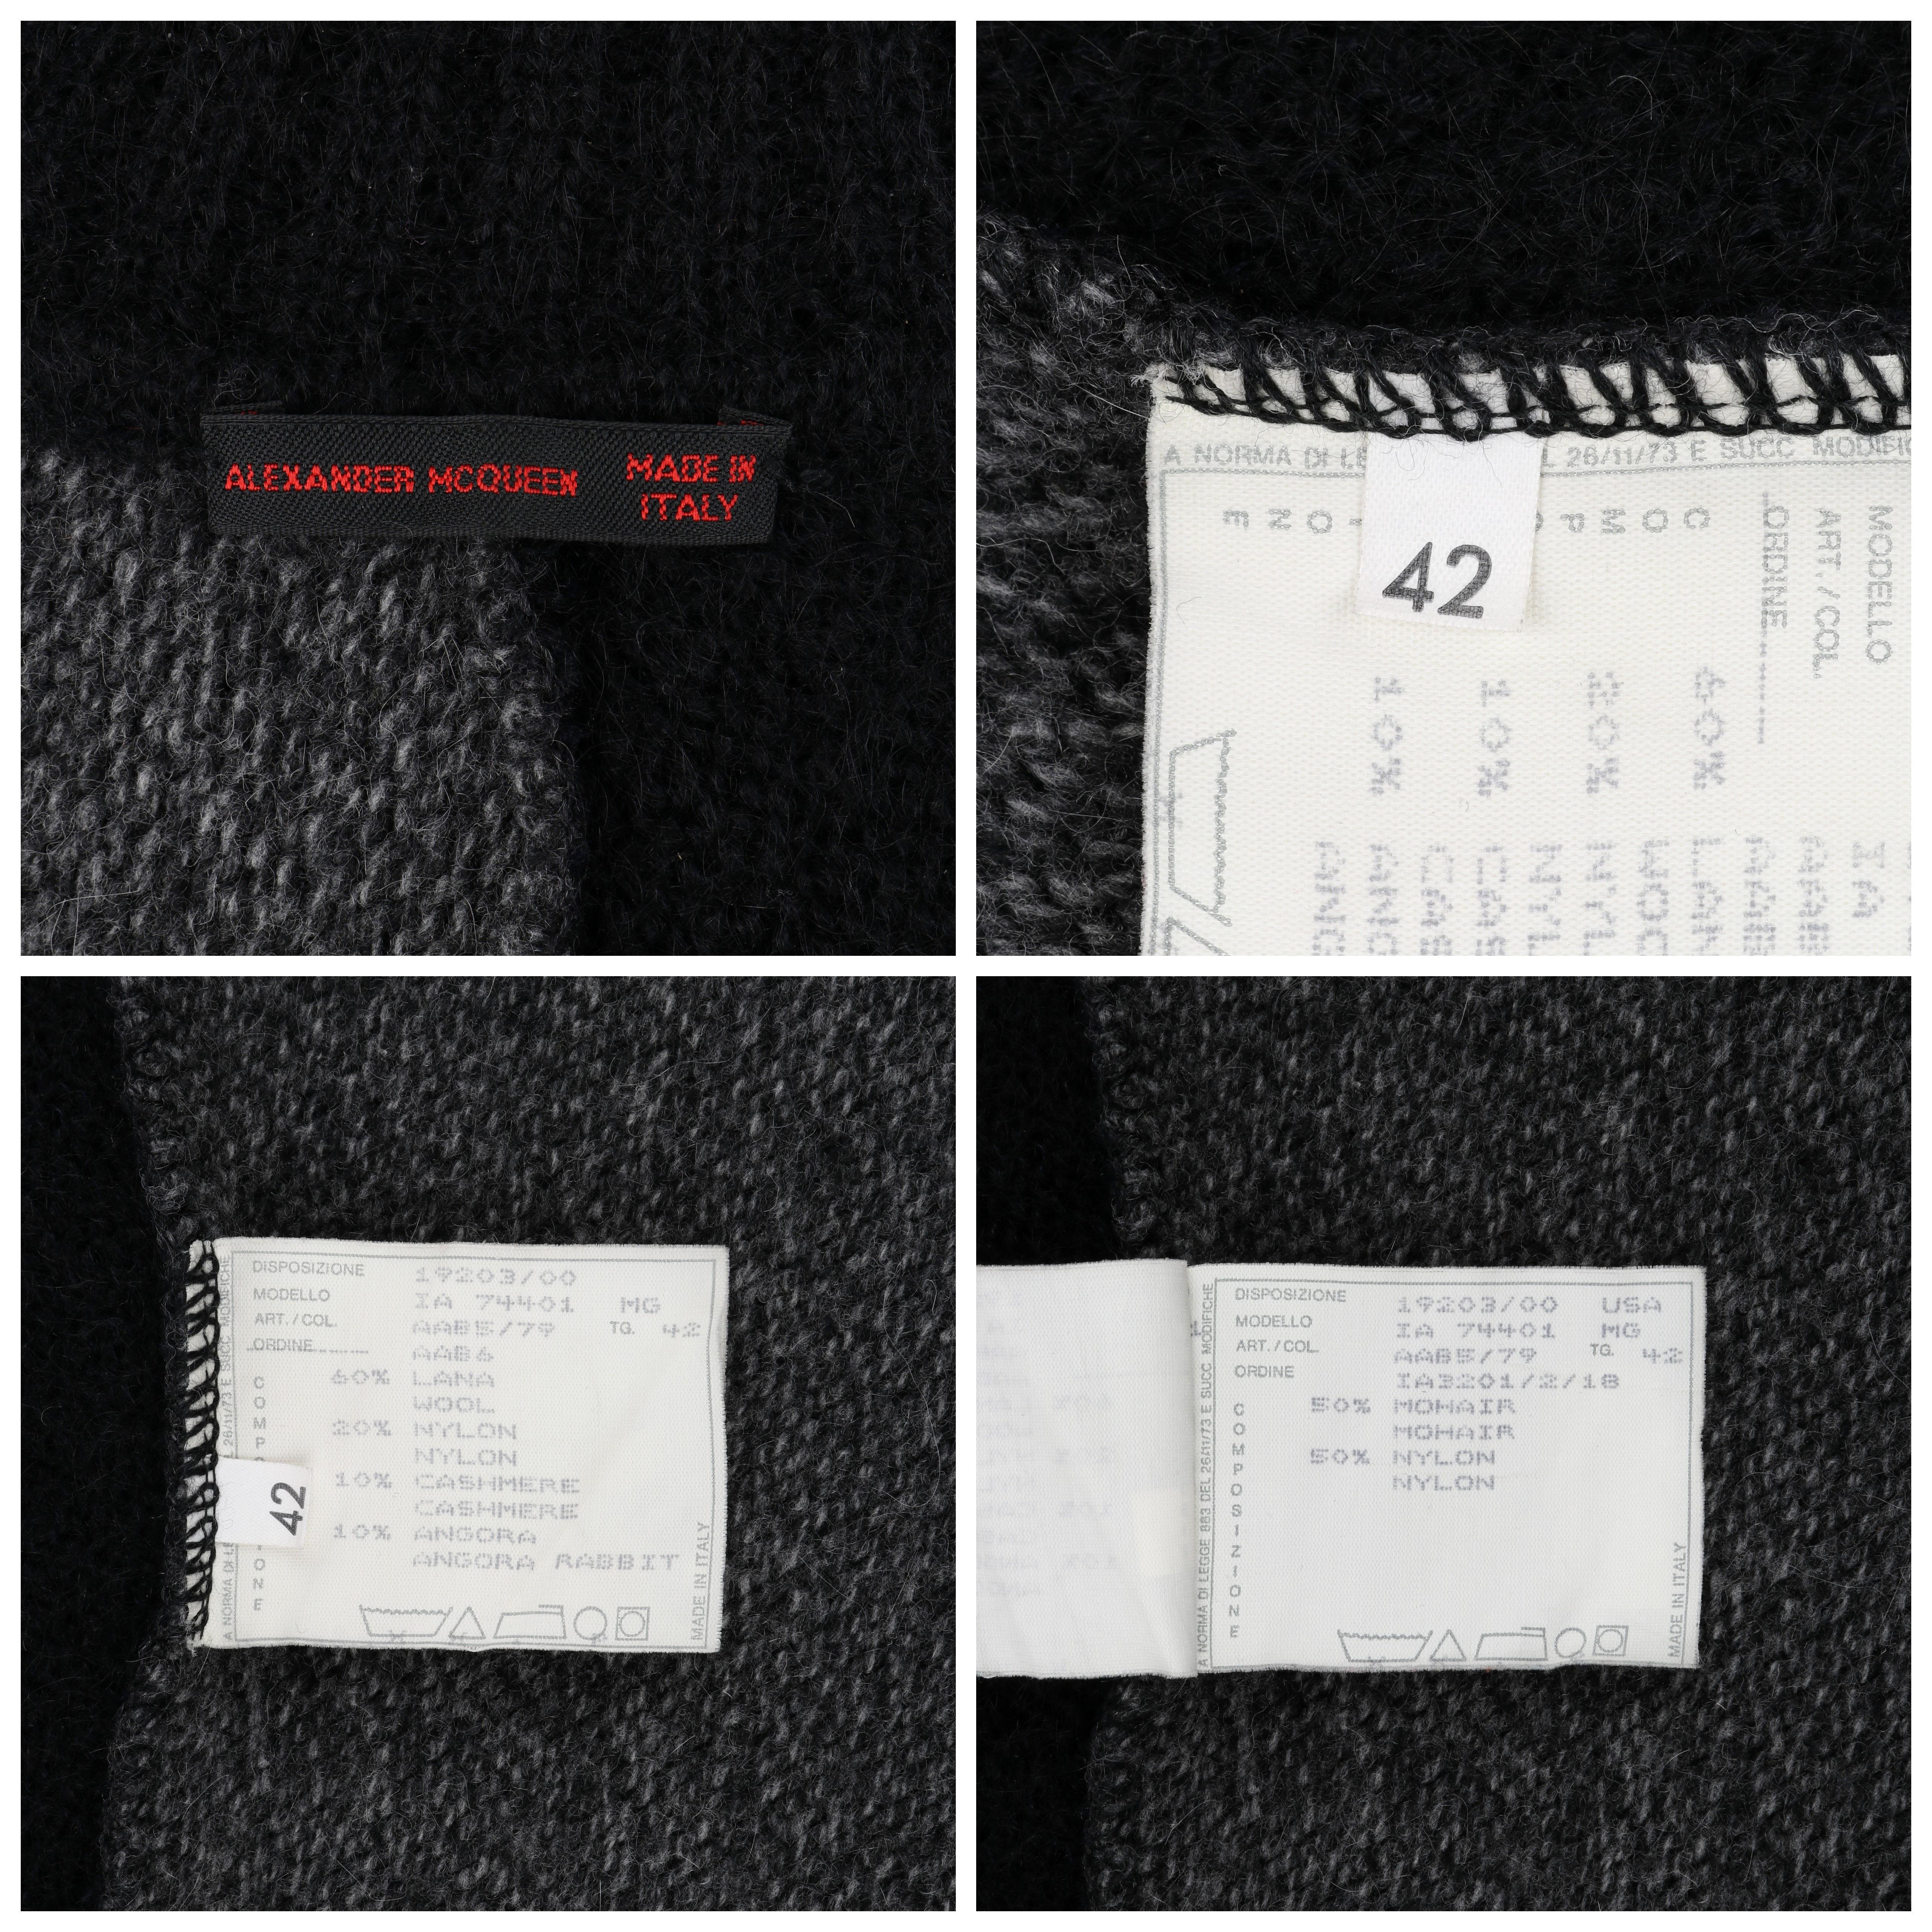 ALEXANDER McQUEEN A/W 1999 “The Overlook” Black Gray Knit Turtleneck Poncho Cape For Sale 3